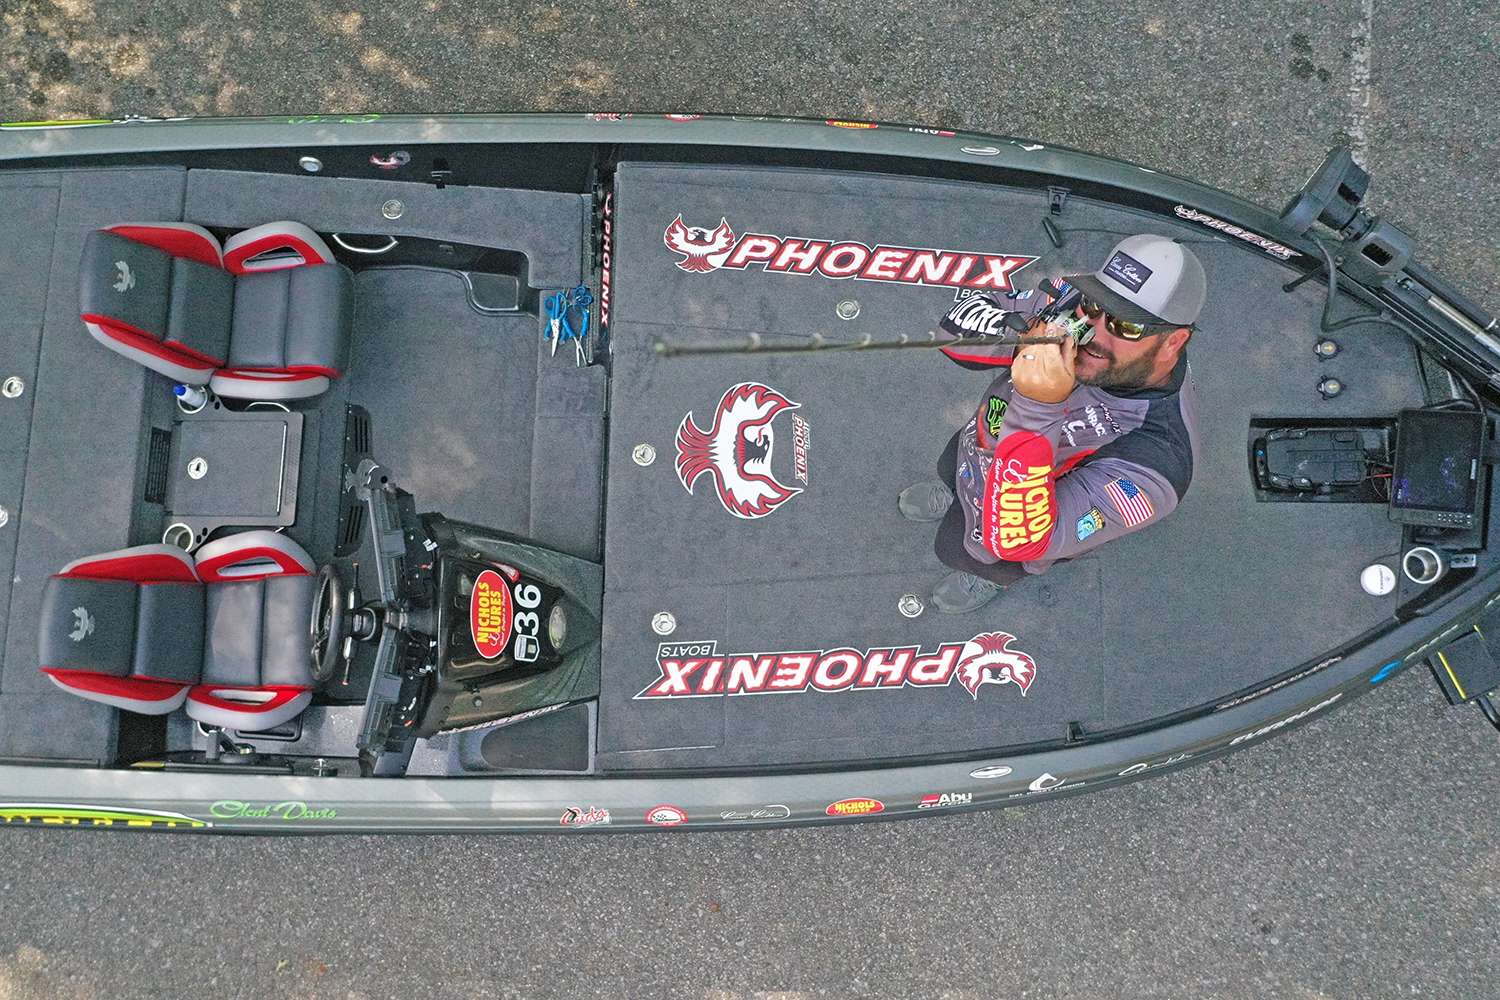 Alabama native and Bassmaster Elite Series pro Clent Davis takes us on a front-to-back tour of his Phoenix 21 PHX.